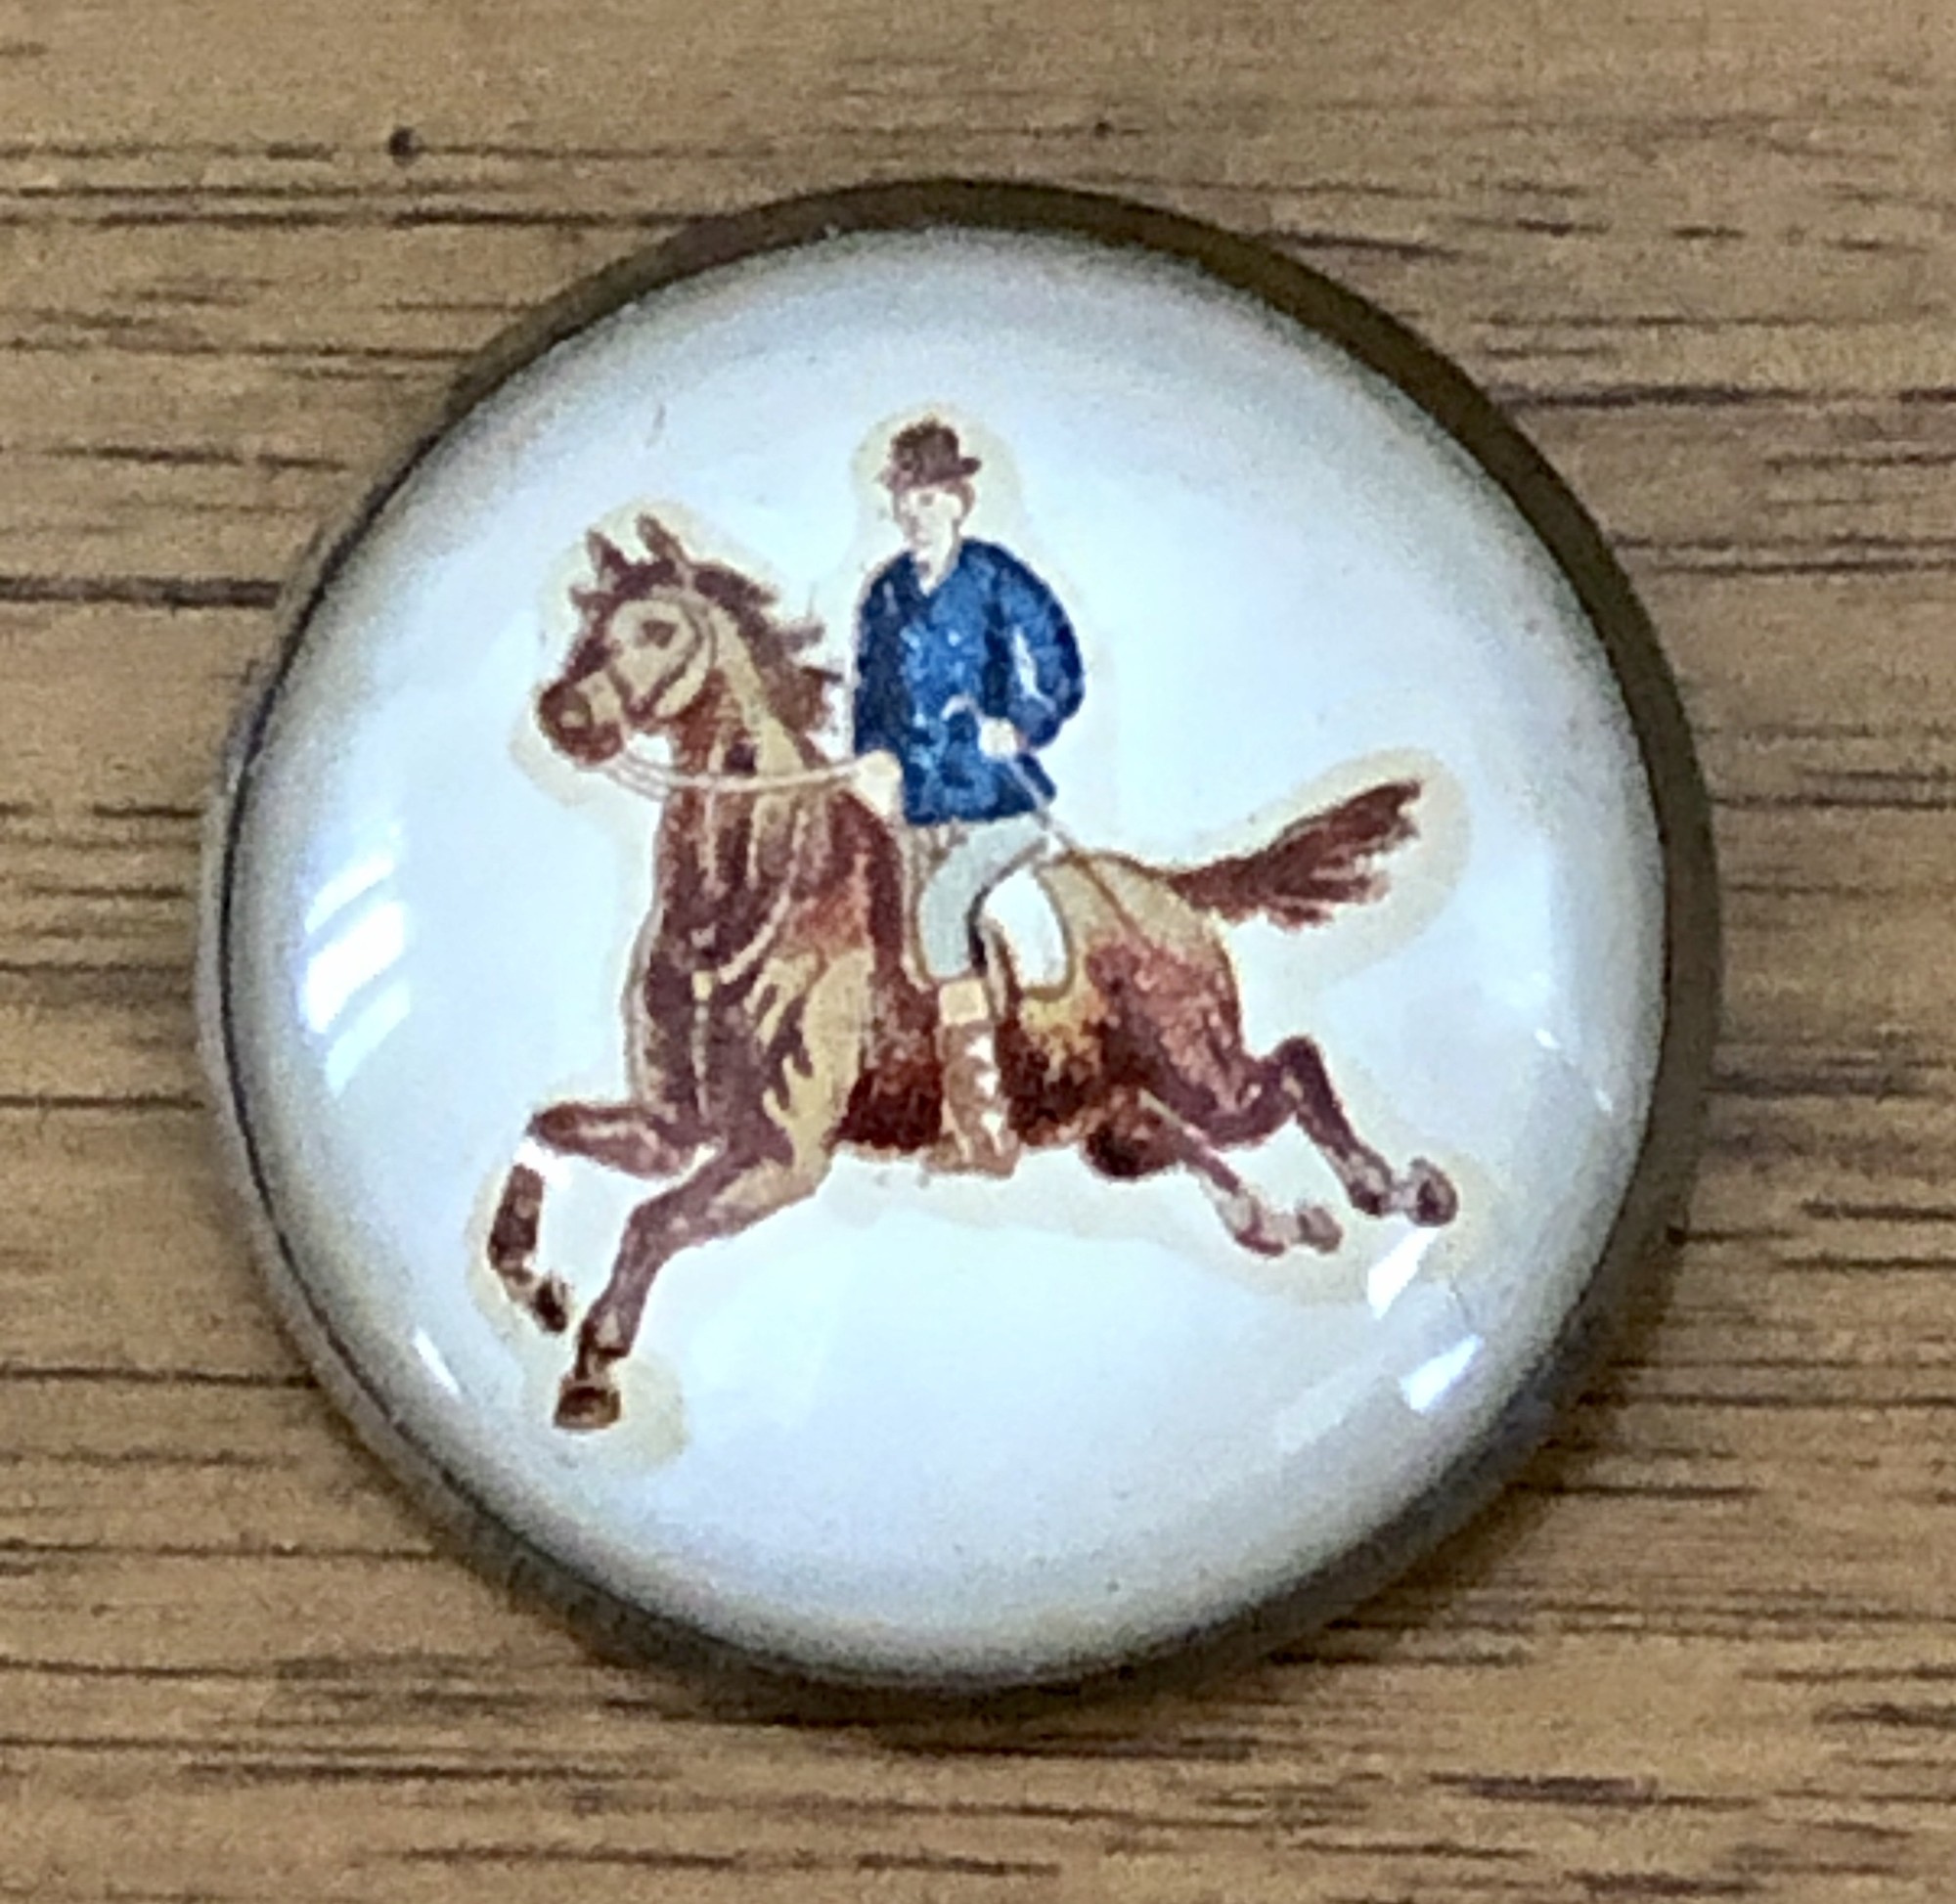 Victorian c.1980-1910 Domed convex glass horse Bridle Rosette Brooch.
Galloping out of a creamy off-white background, this spirited galloping horse and rider are a Victorian die-cut made as a bridle rosette brooch style pin. At 1-5/8 inches across, the clear artwork is an eyecatcher. The back of the rosette was designed to slide a horse bridle strap through.